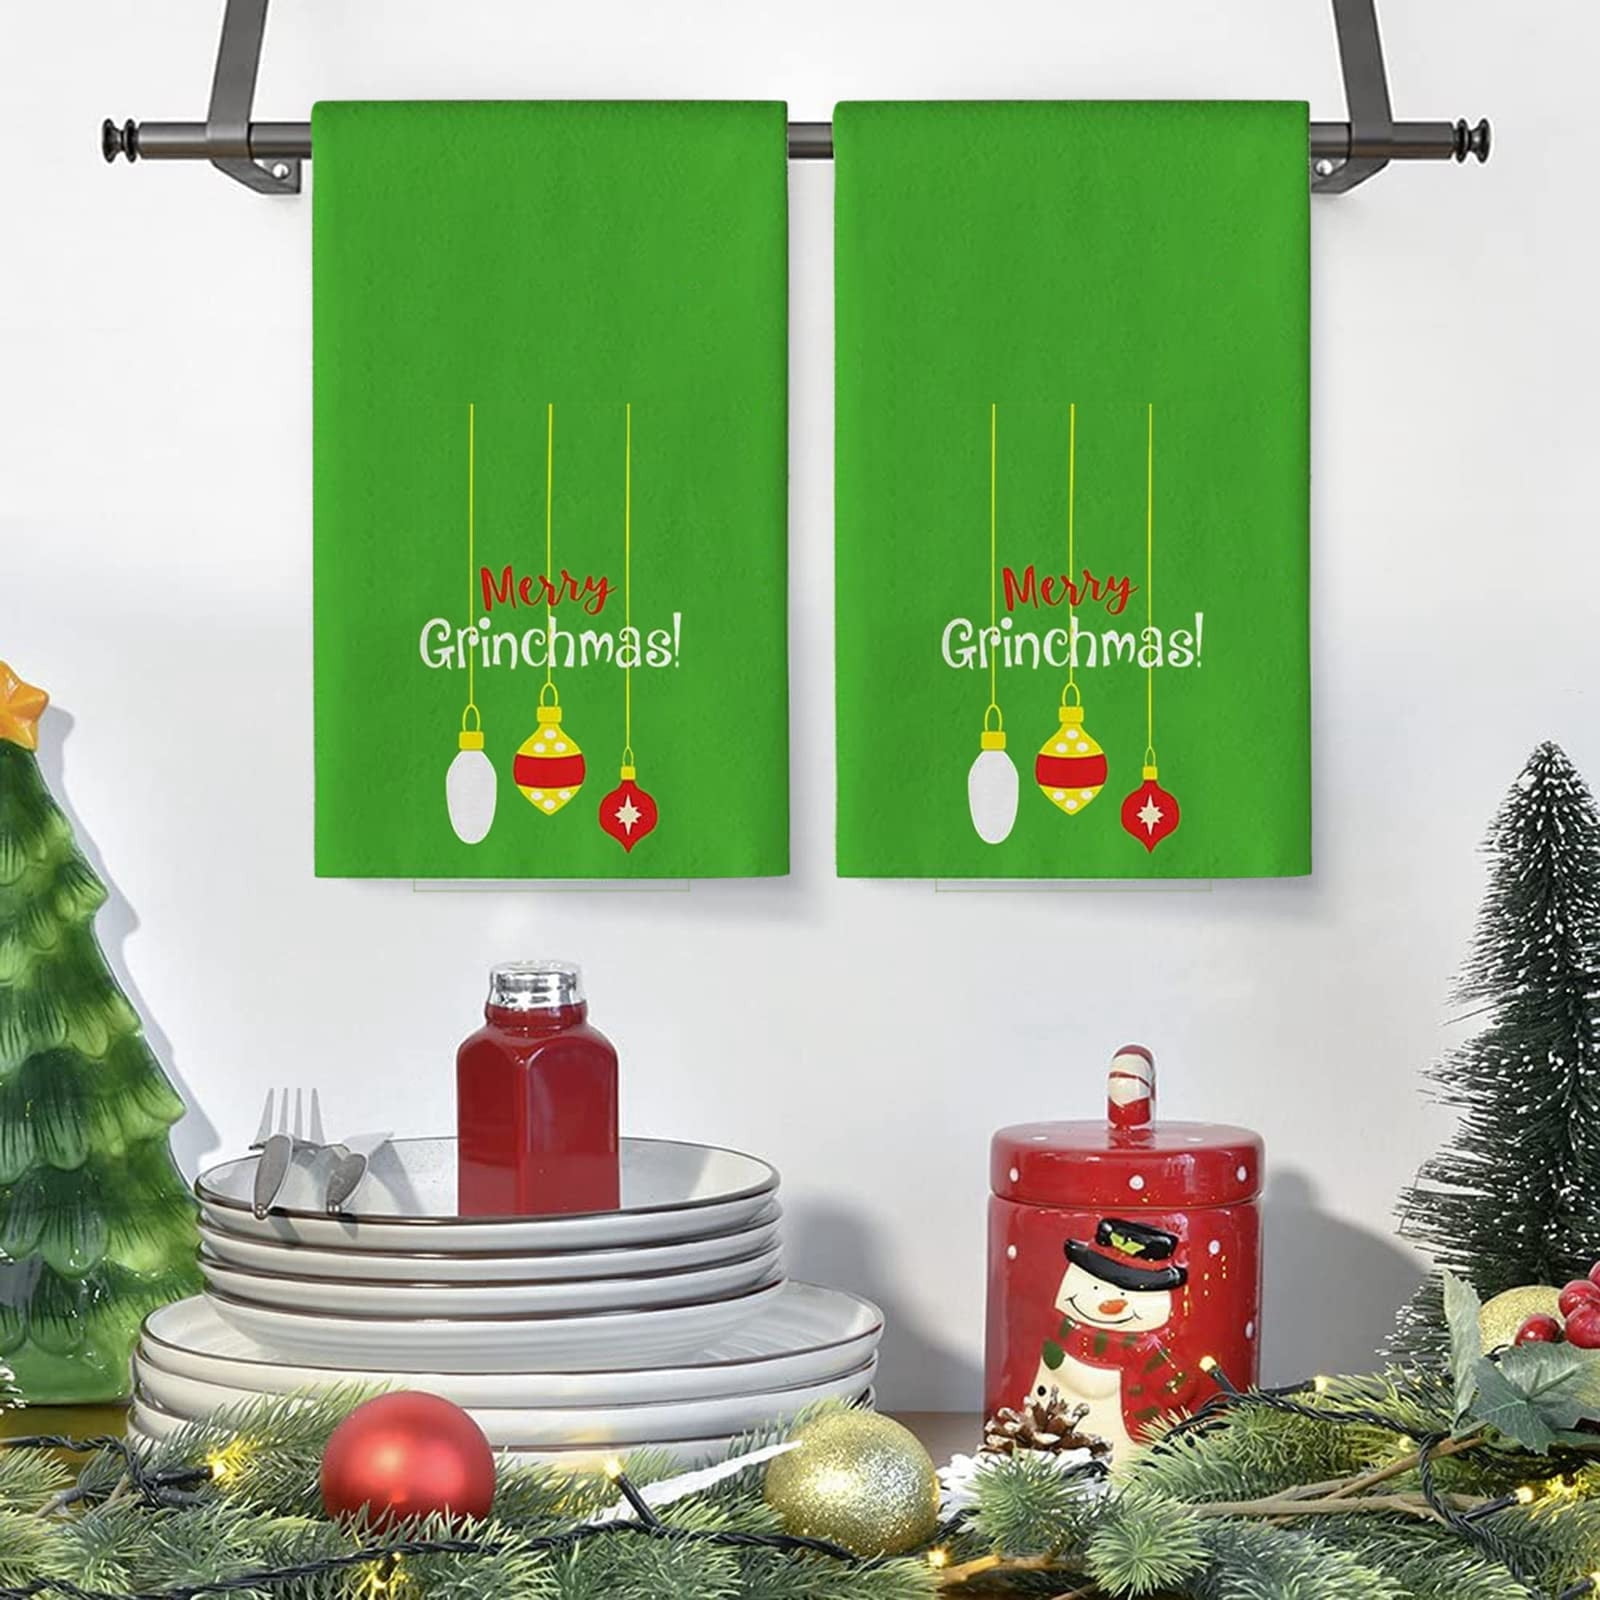 Tuelaly Christmas Kitchen Towels and Dishcloths,Merry Christmas Tree  Snowman Dish Towels,Gnome Red Buffalo Plaid Truck Holiday Tea Hand Towels